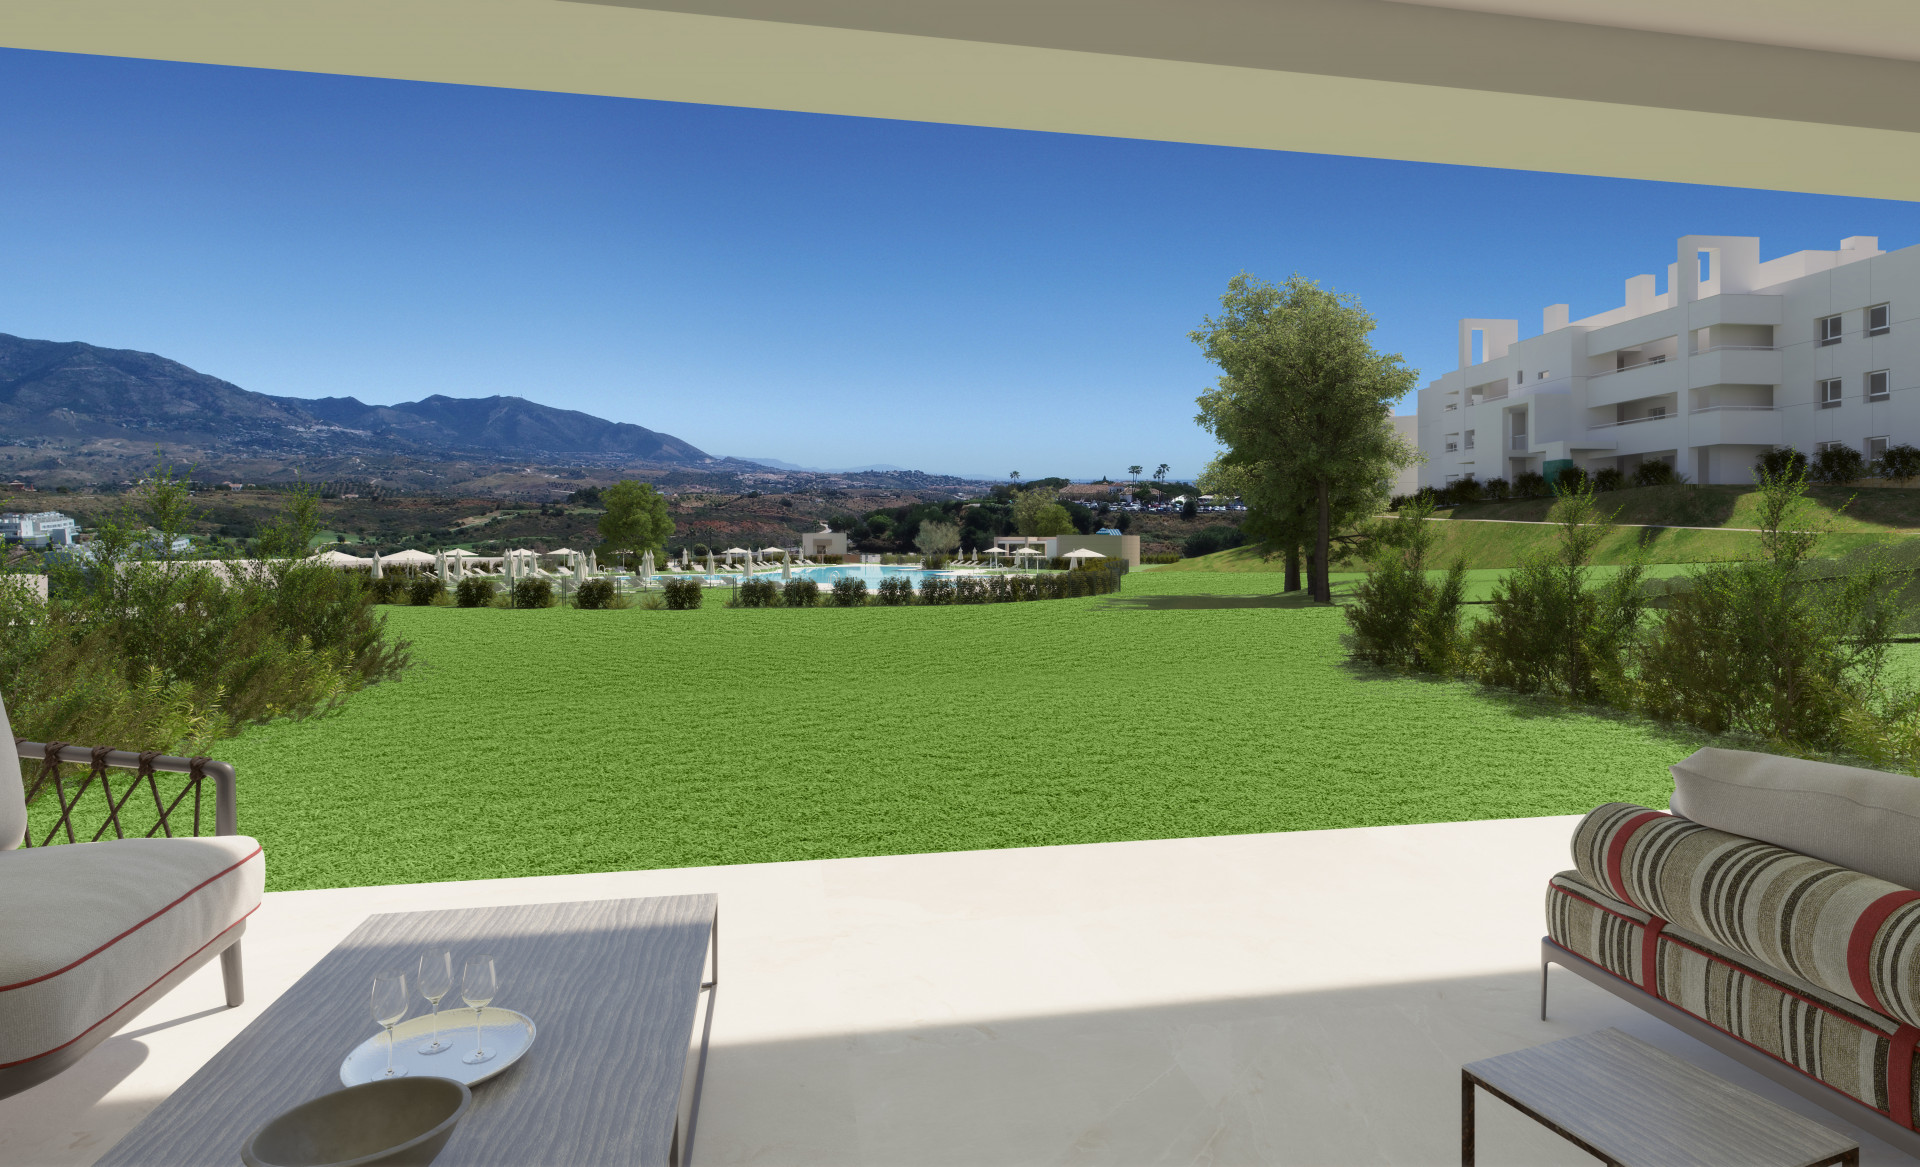 Solana Village: Contemporary flats and penthouses for golf lovers at La Cala Golf Resort in Mijas. | Image 7